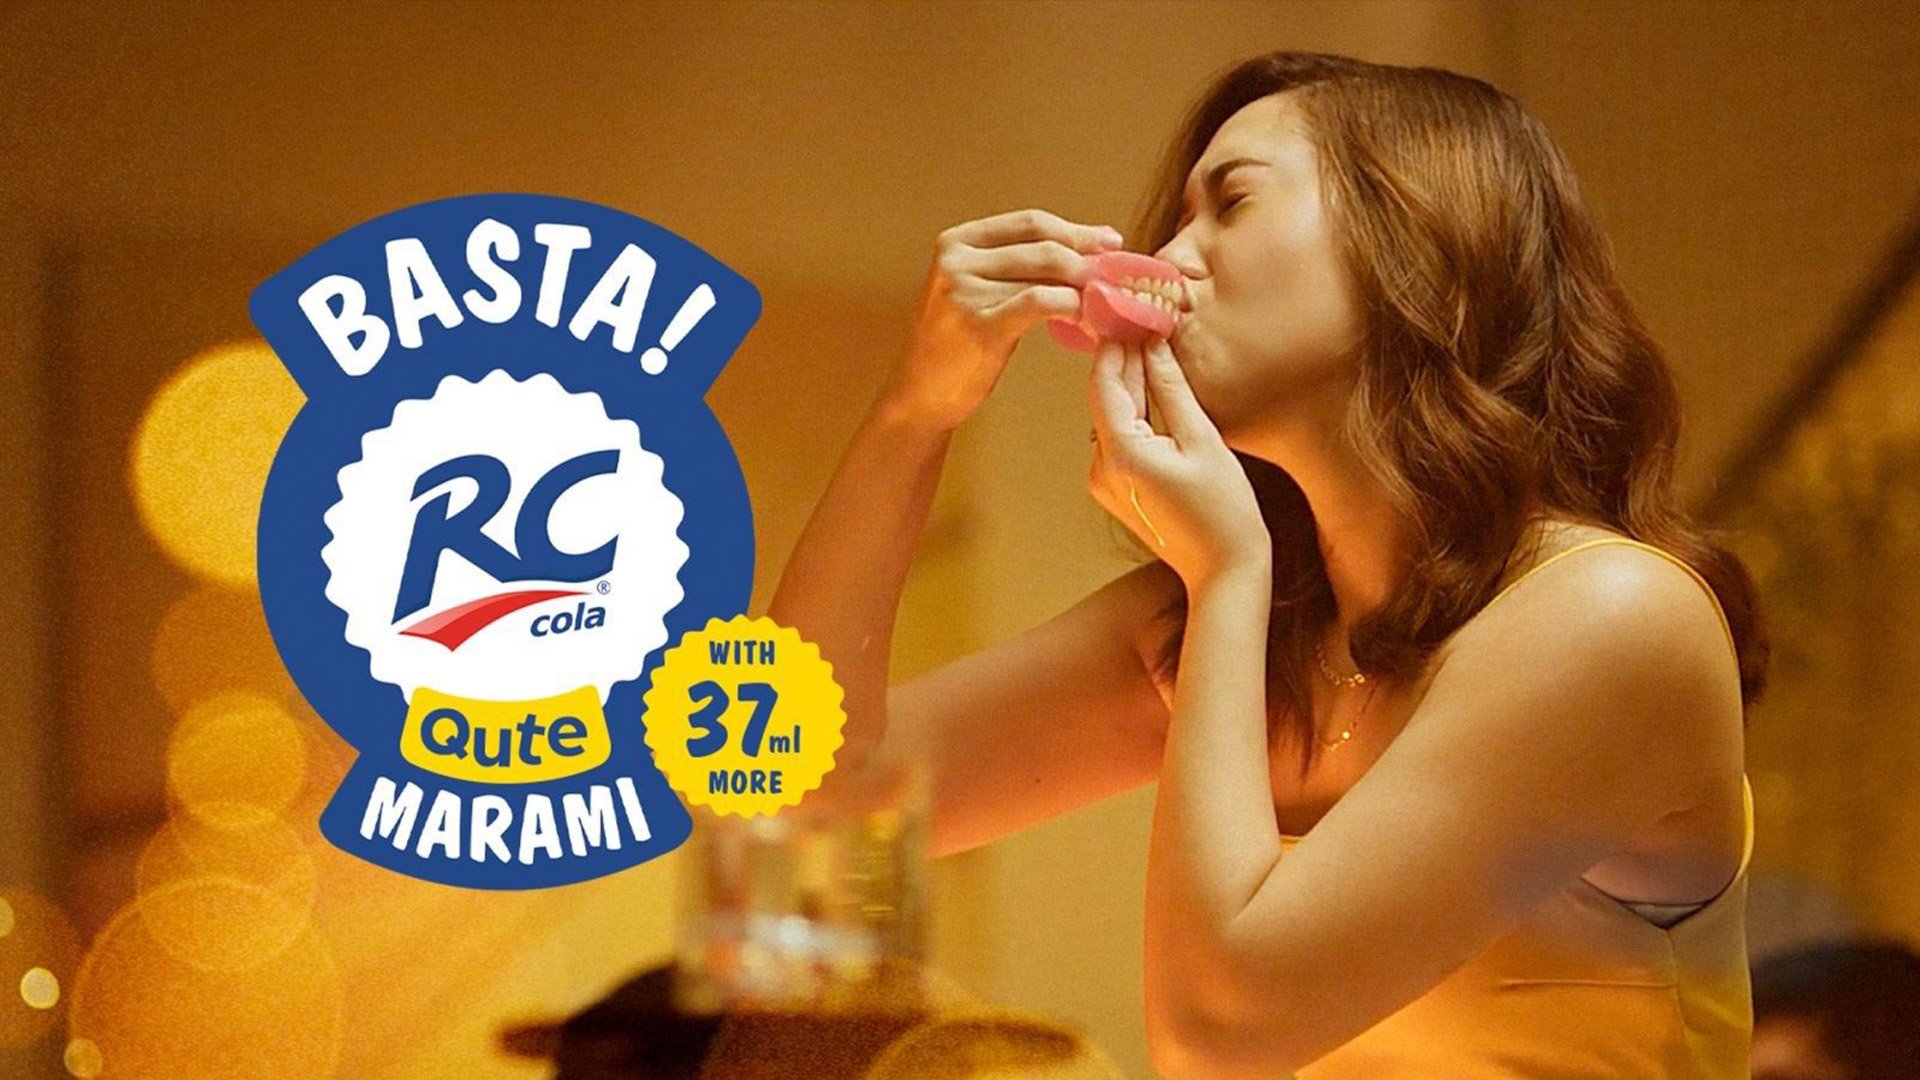 GIGIL’s new campaign for RC Cola Qute issues more reactions and theories online